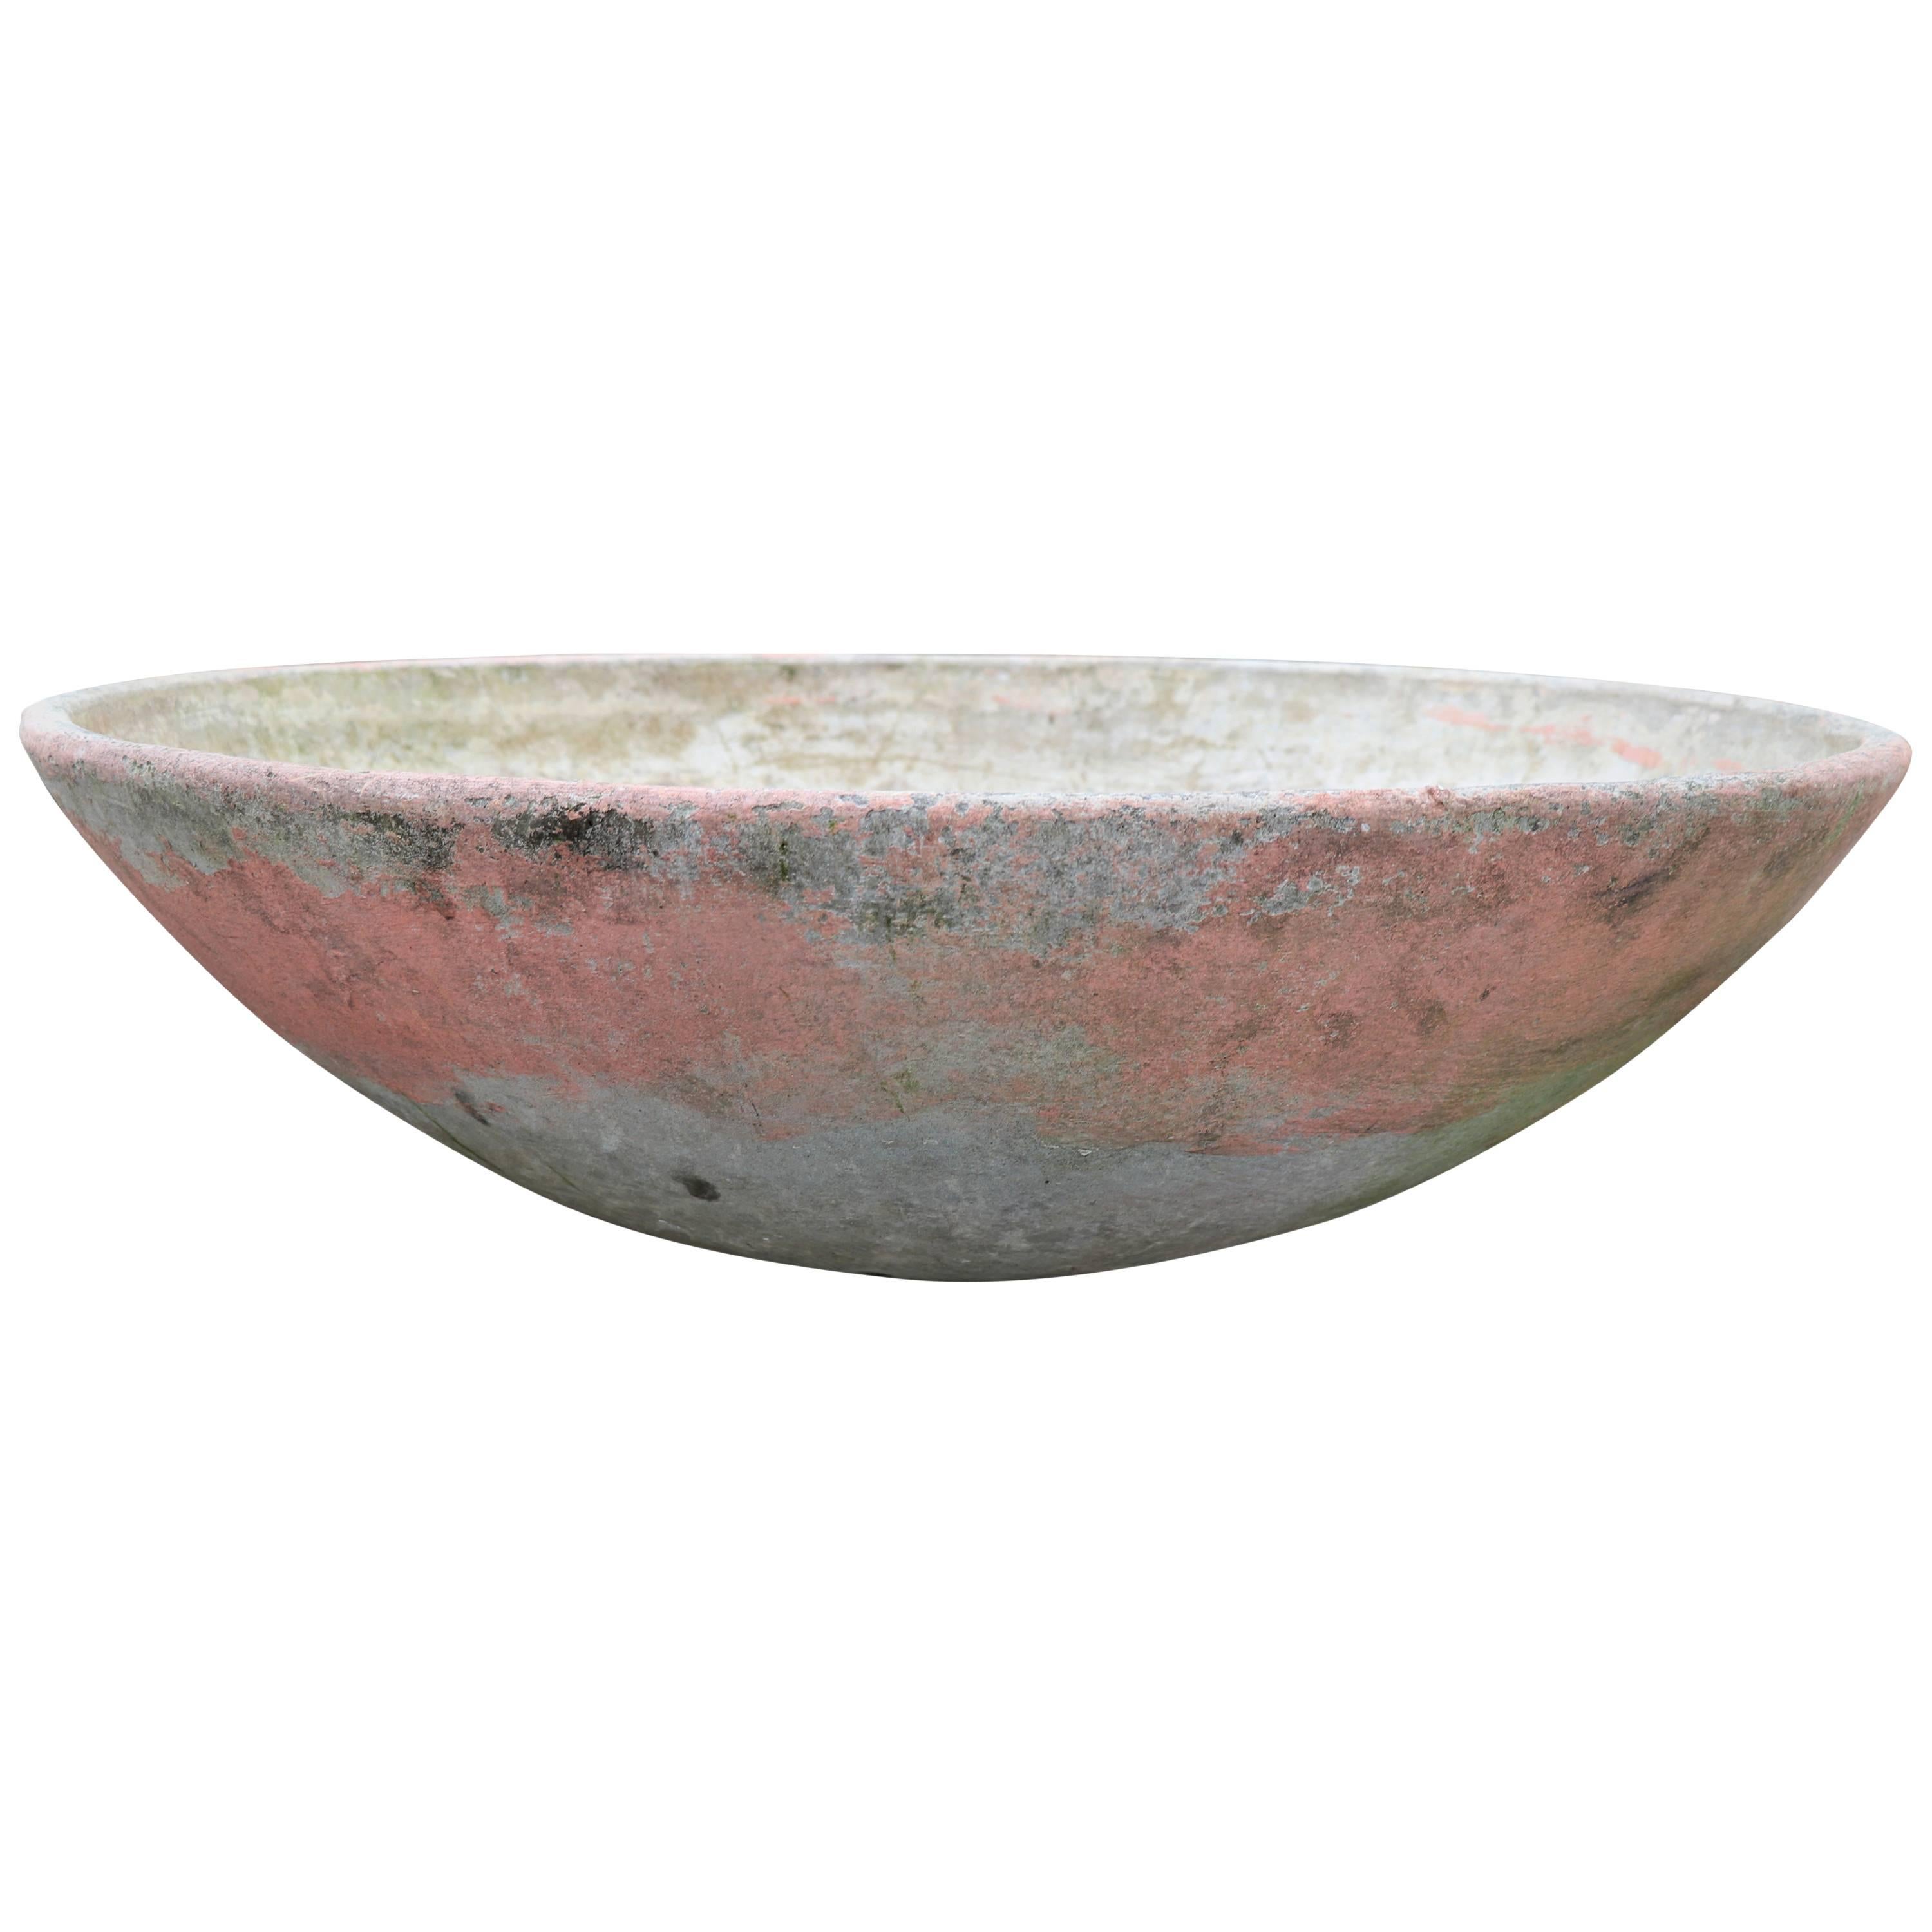 Willy Guhl Saucer Planter with Pink Paint, circa 1950